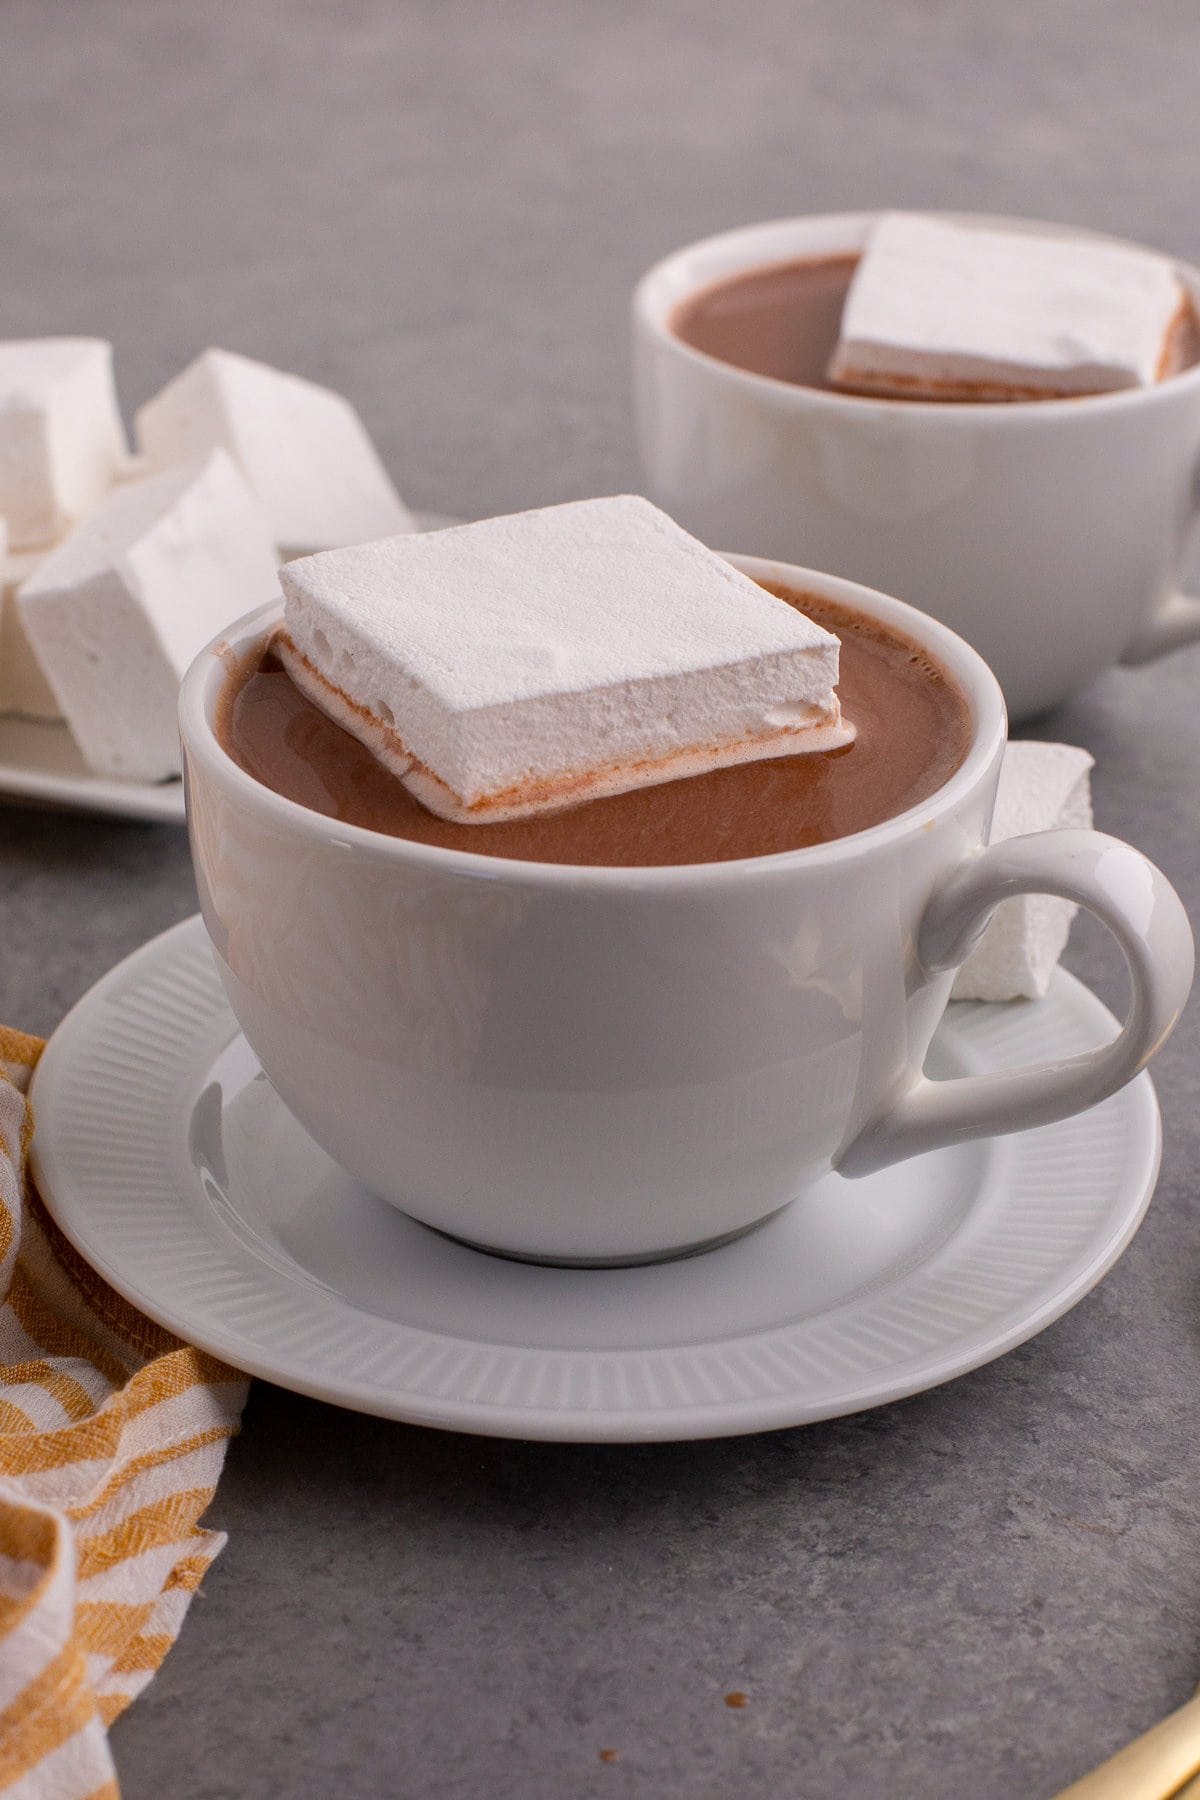 Cup of hot cocoa with large homemade marshmallow on top.